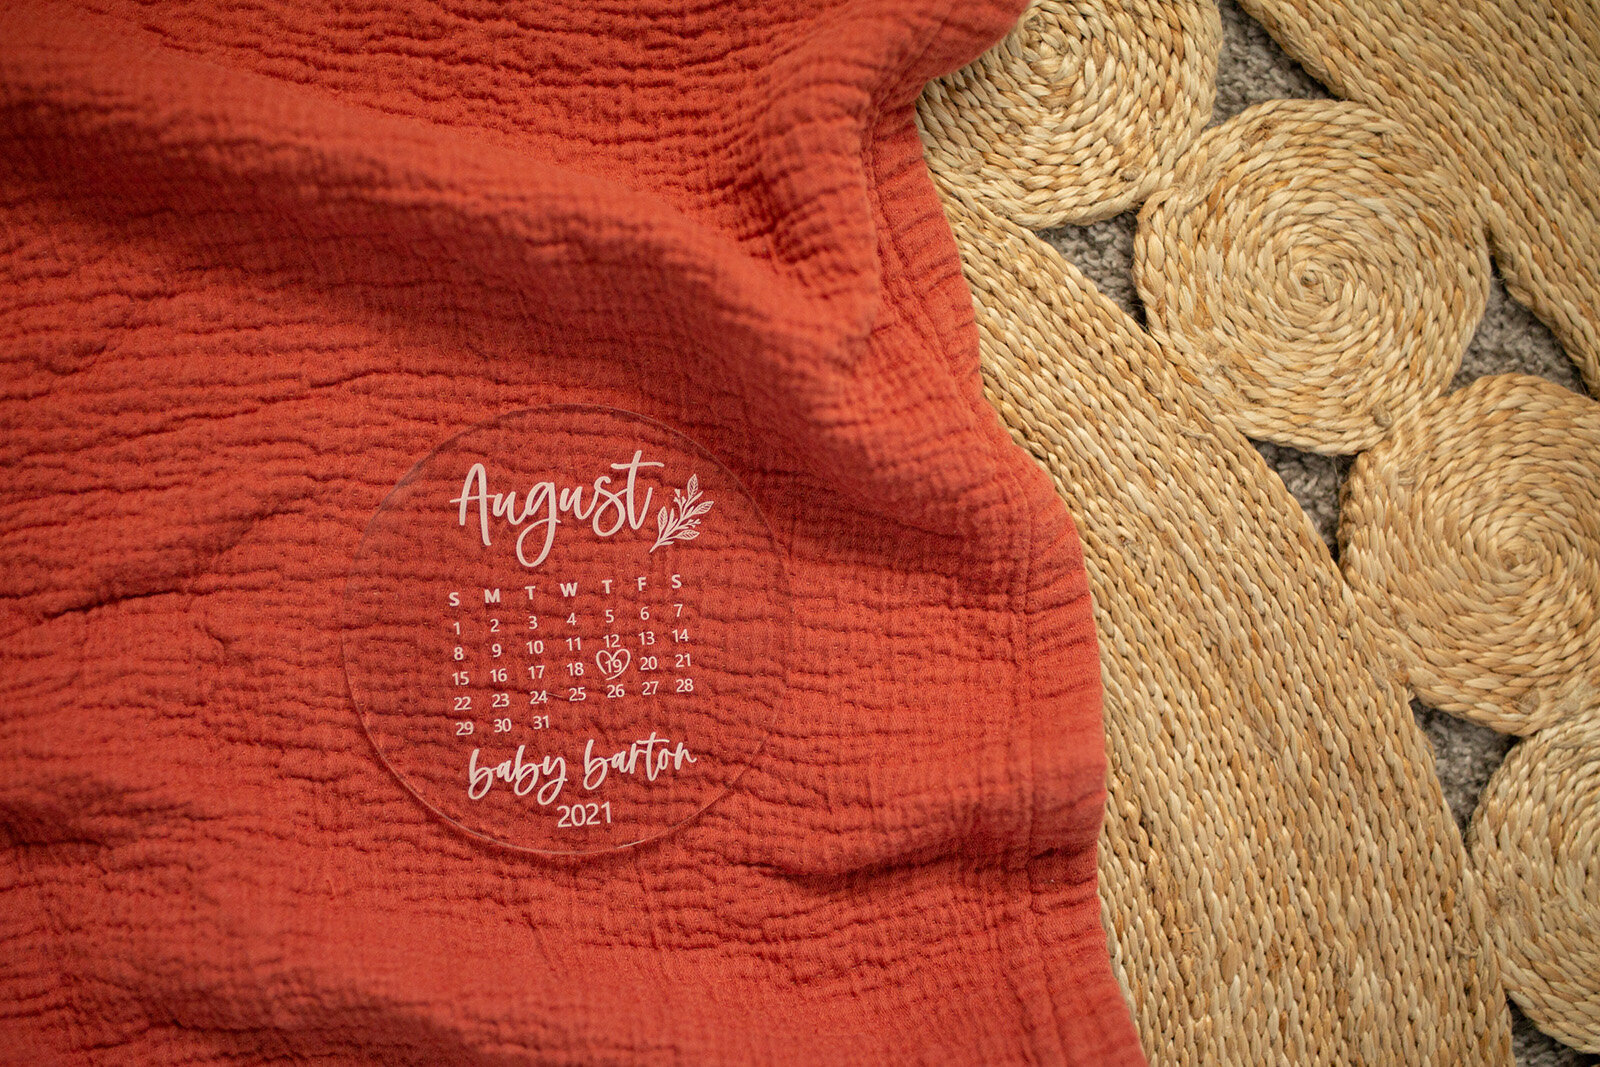 boho product photography on red blanket